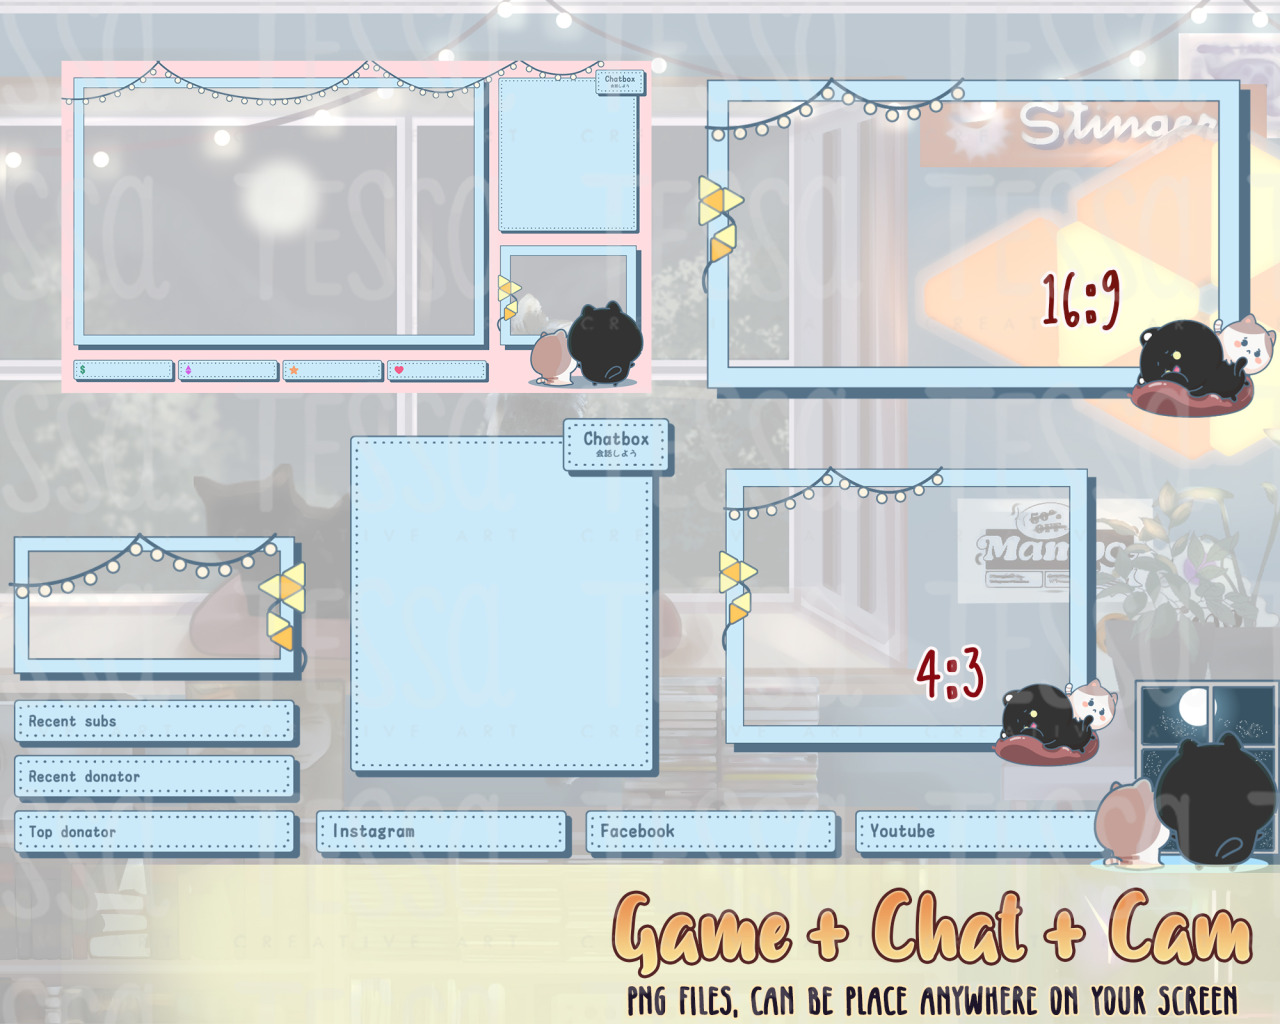 Cats on Window Animated Streamer FULL Package is now available for purchase! Free Bonus Kit Upgrade~